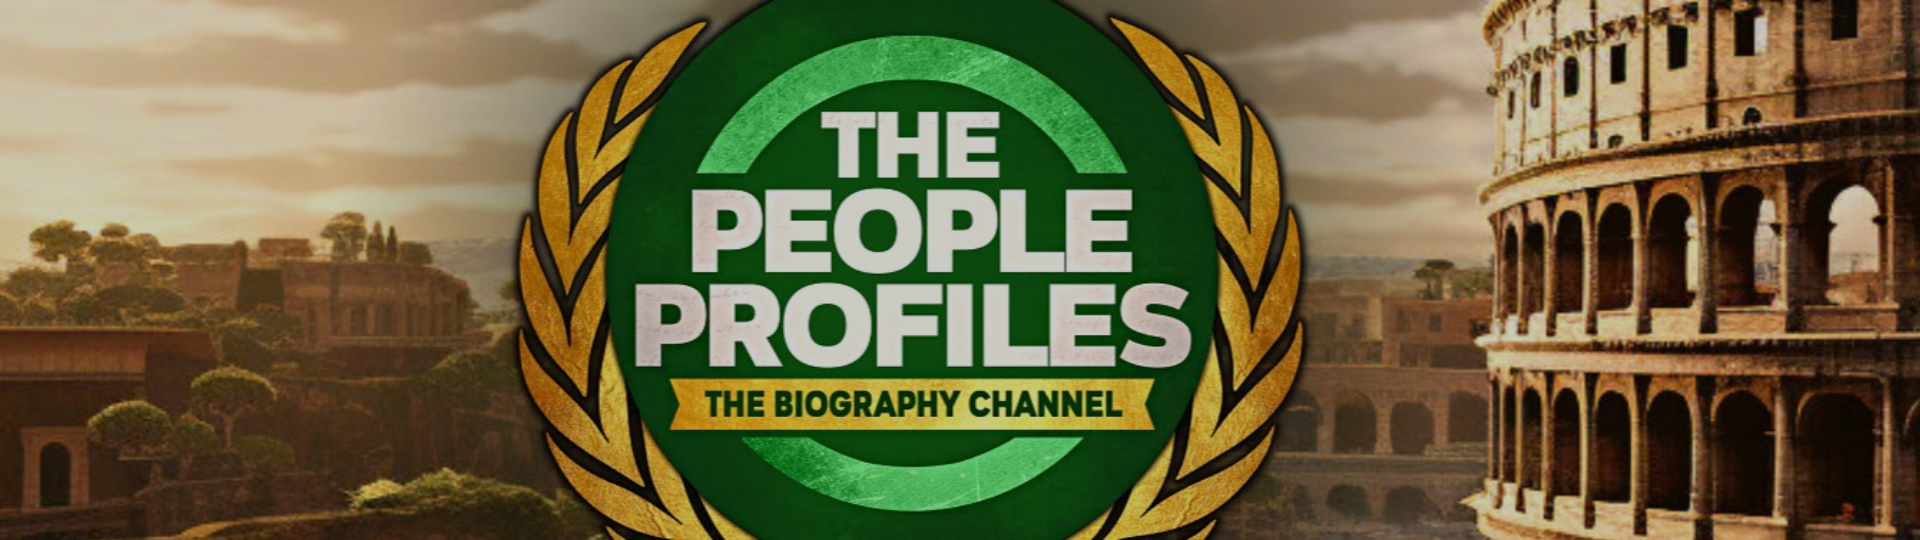 Little Dot Studios Partners With The People Profiles For An Output Deal Of Feature Docs For Its Digital Media Network